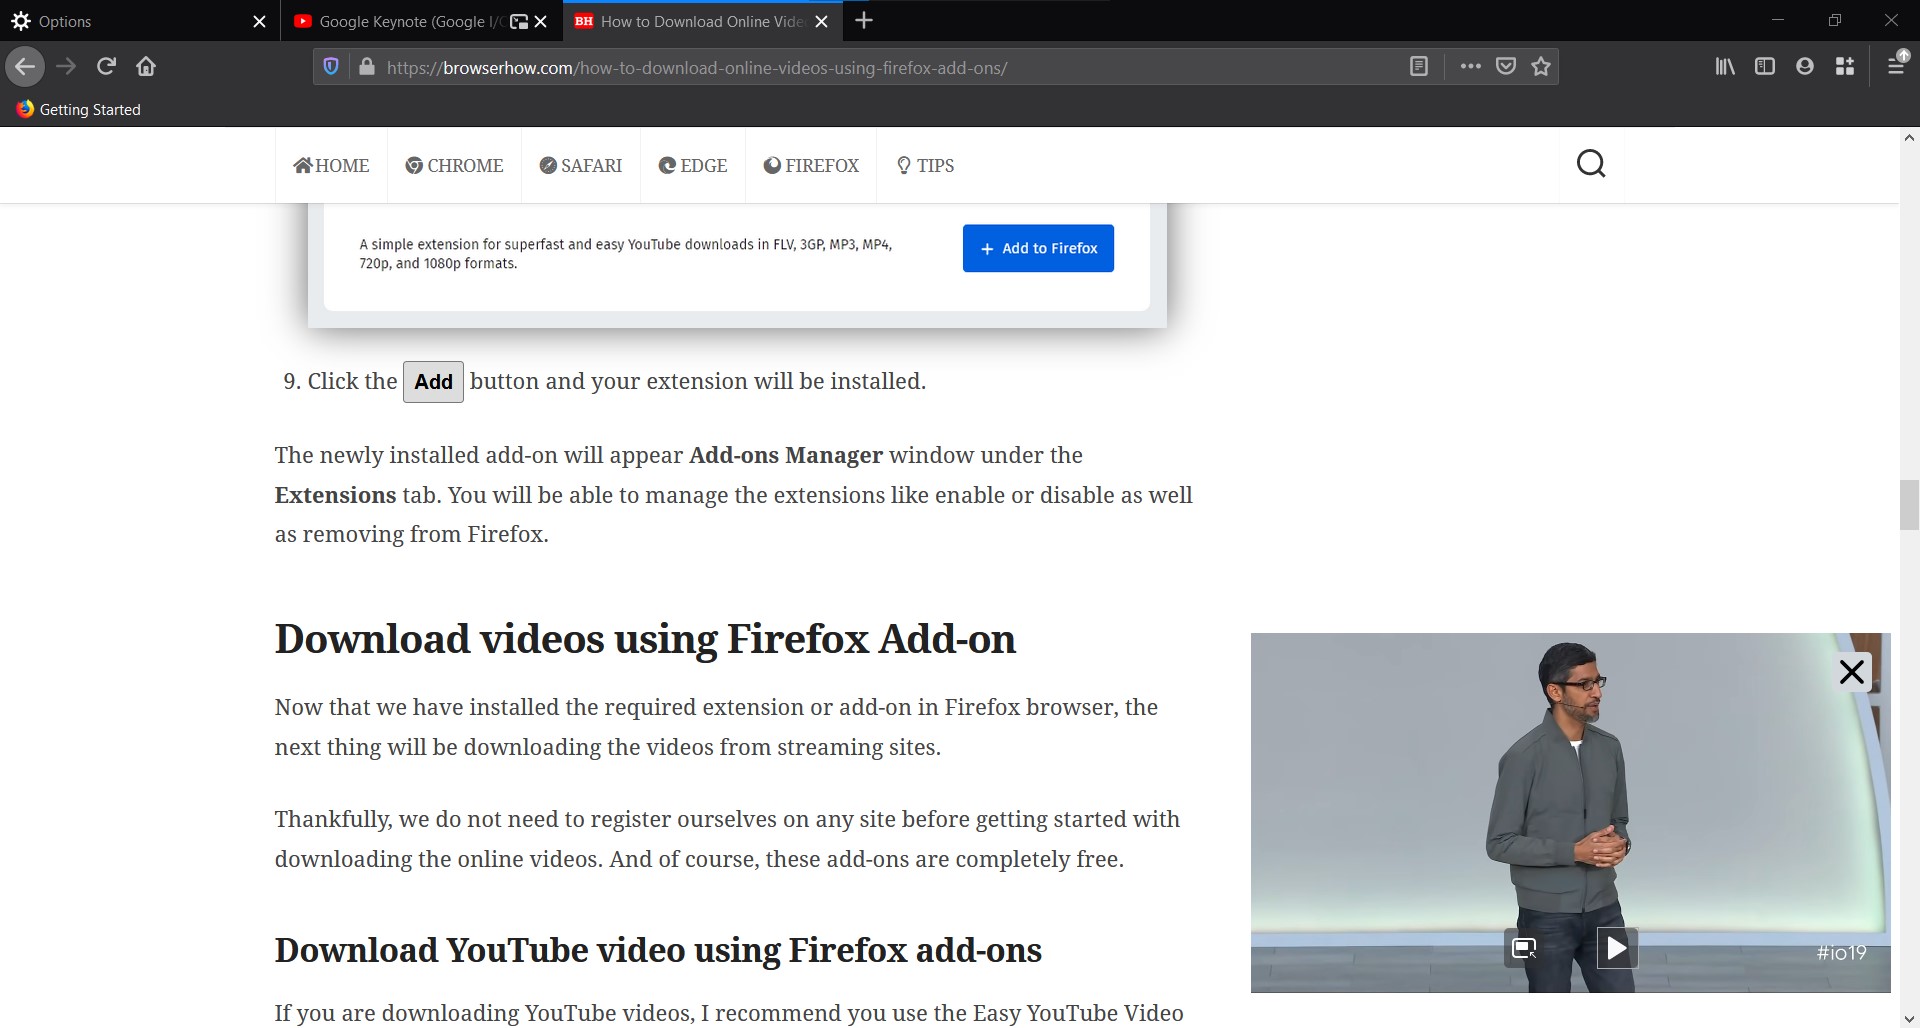 PiP Mode enabled on Firefox example